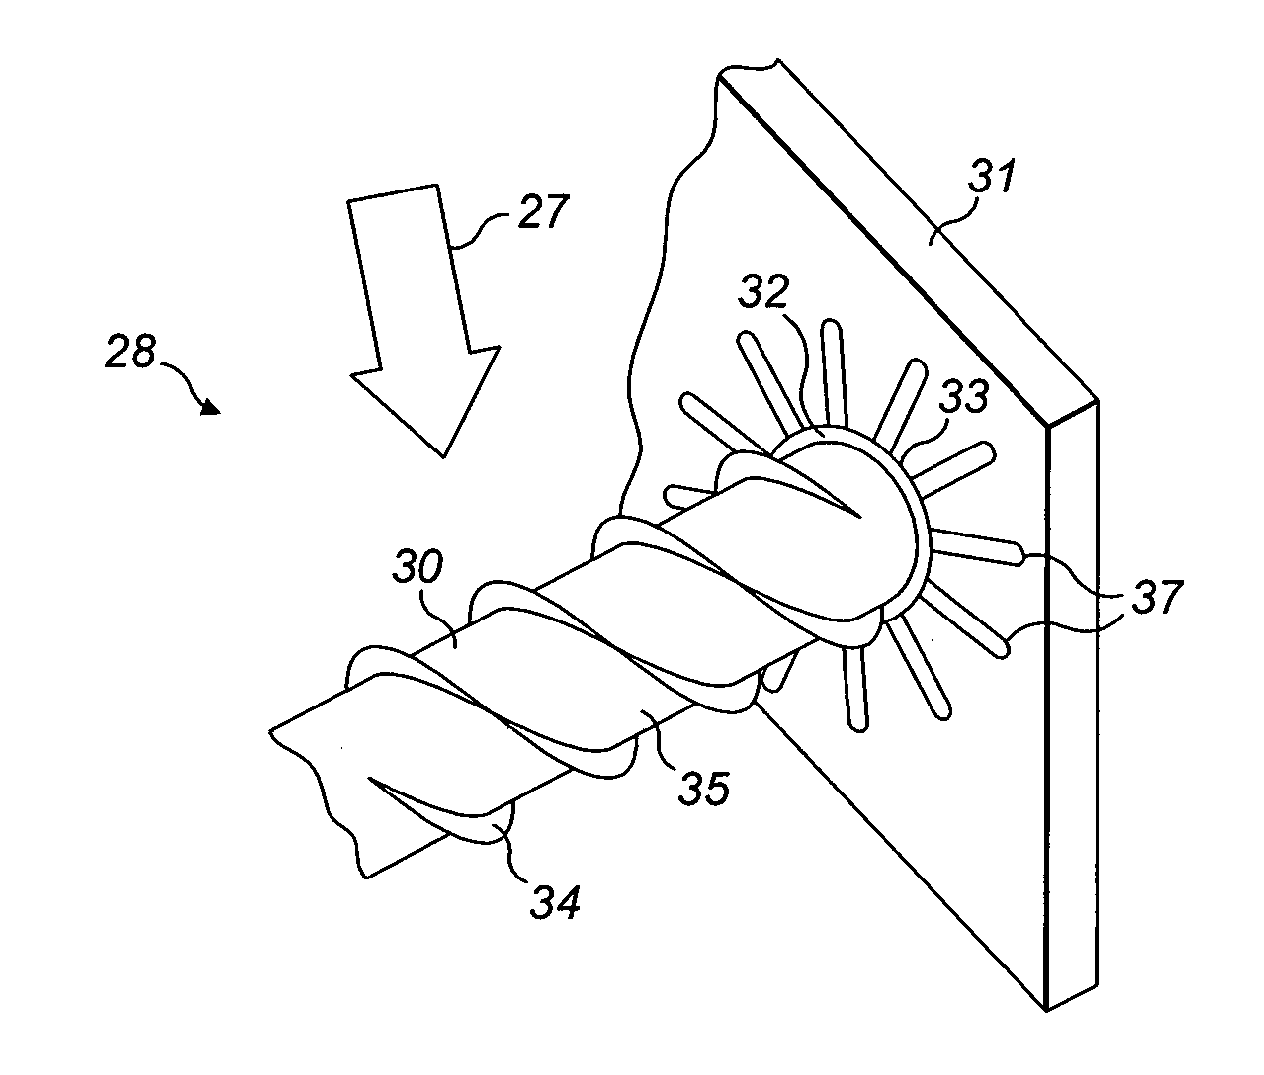 Biomaterial process and apparatus